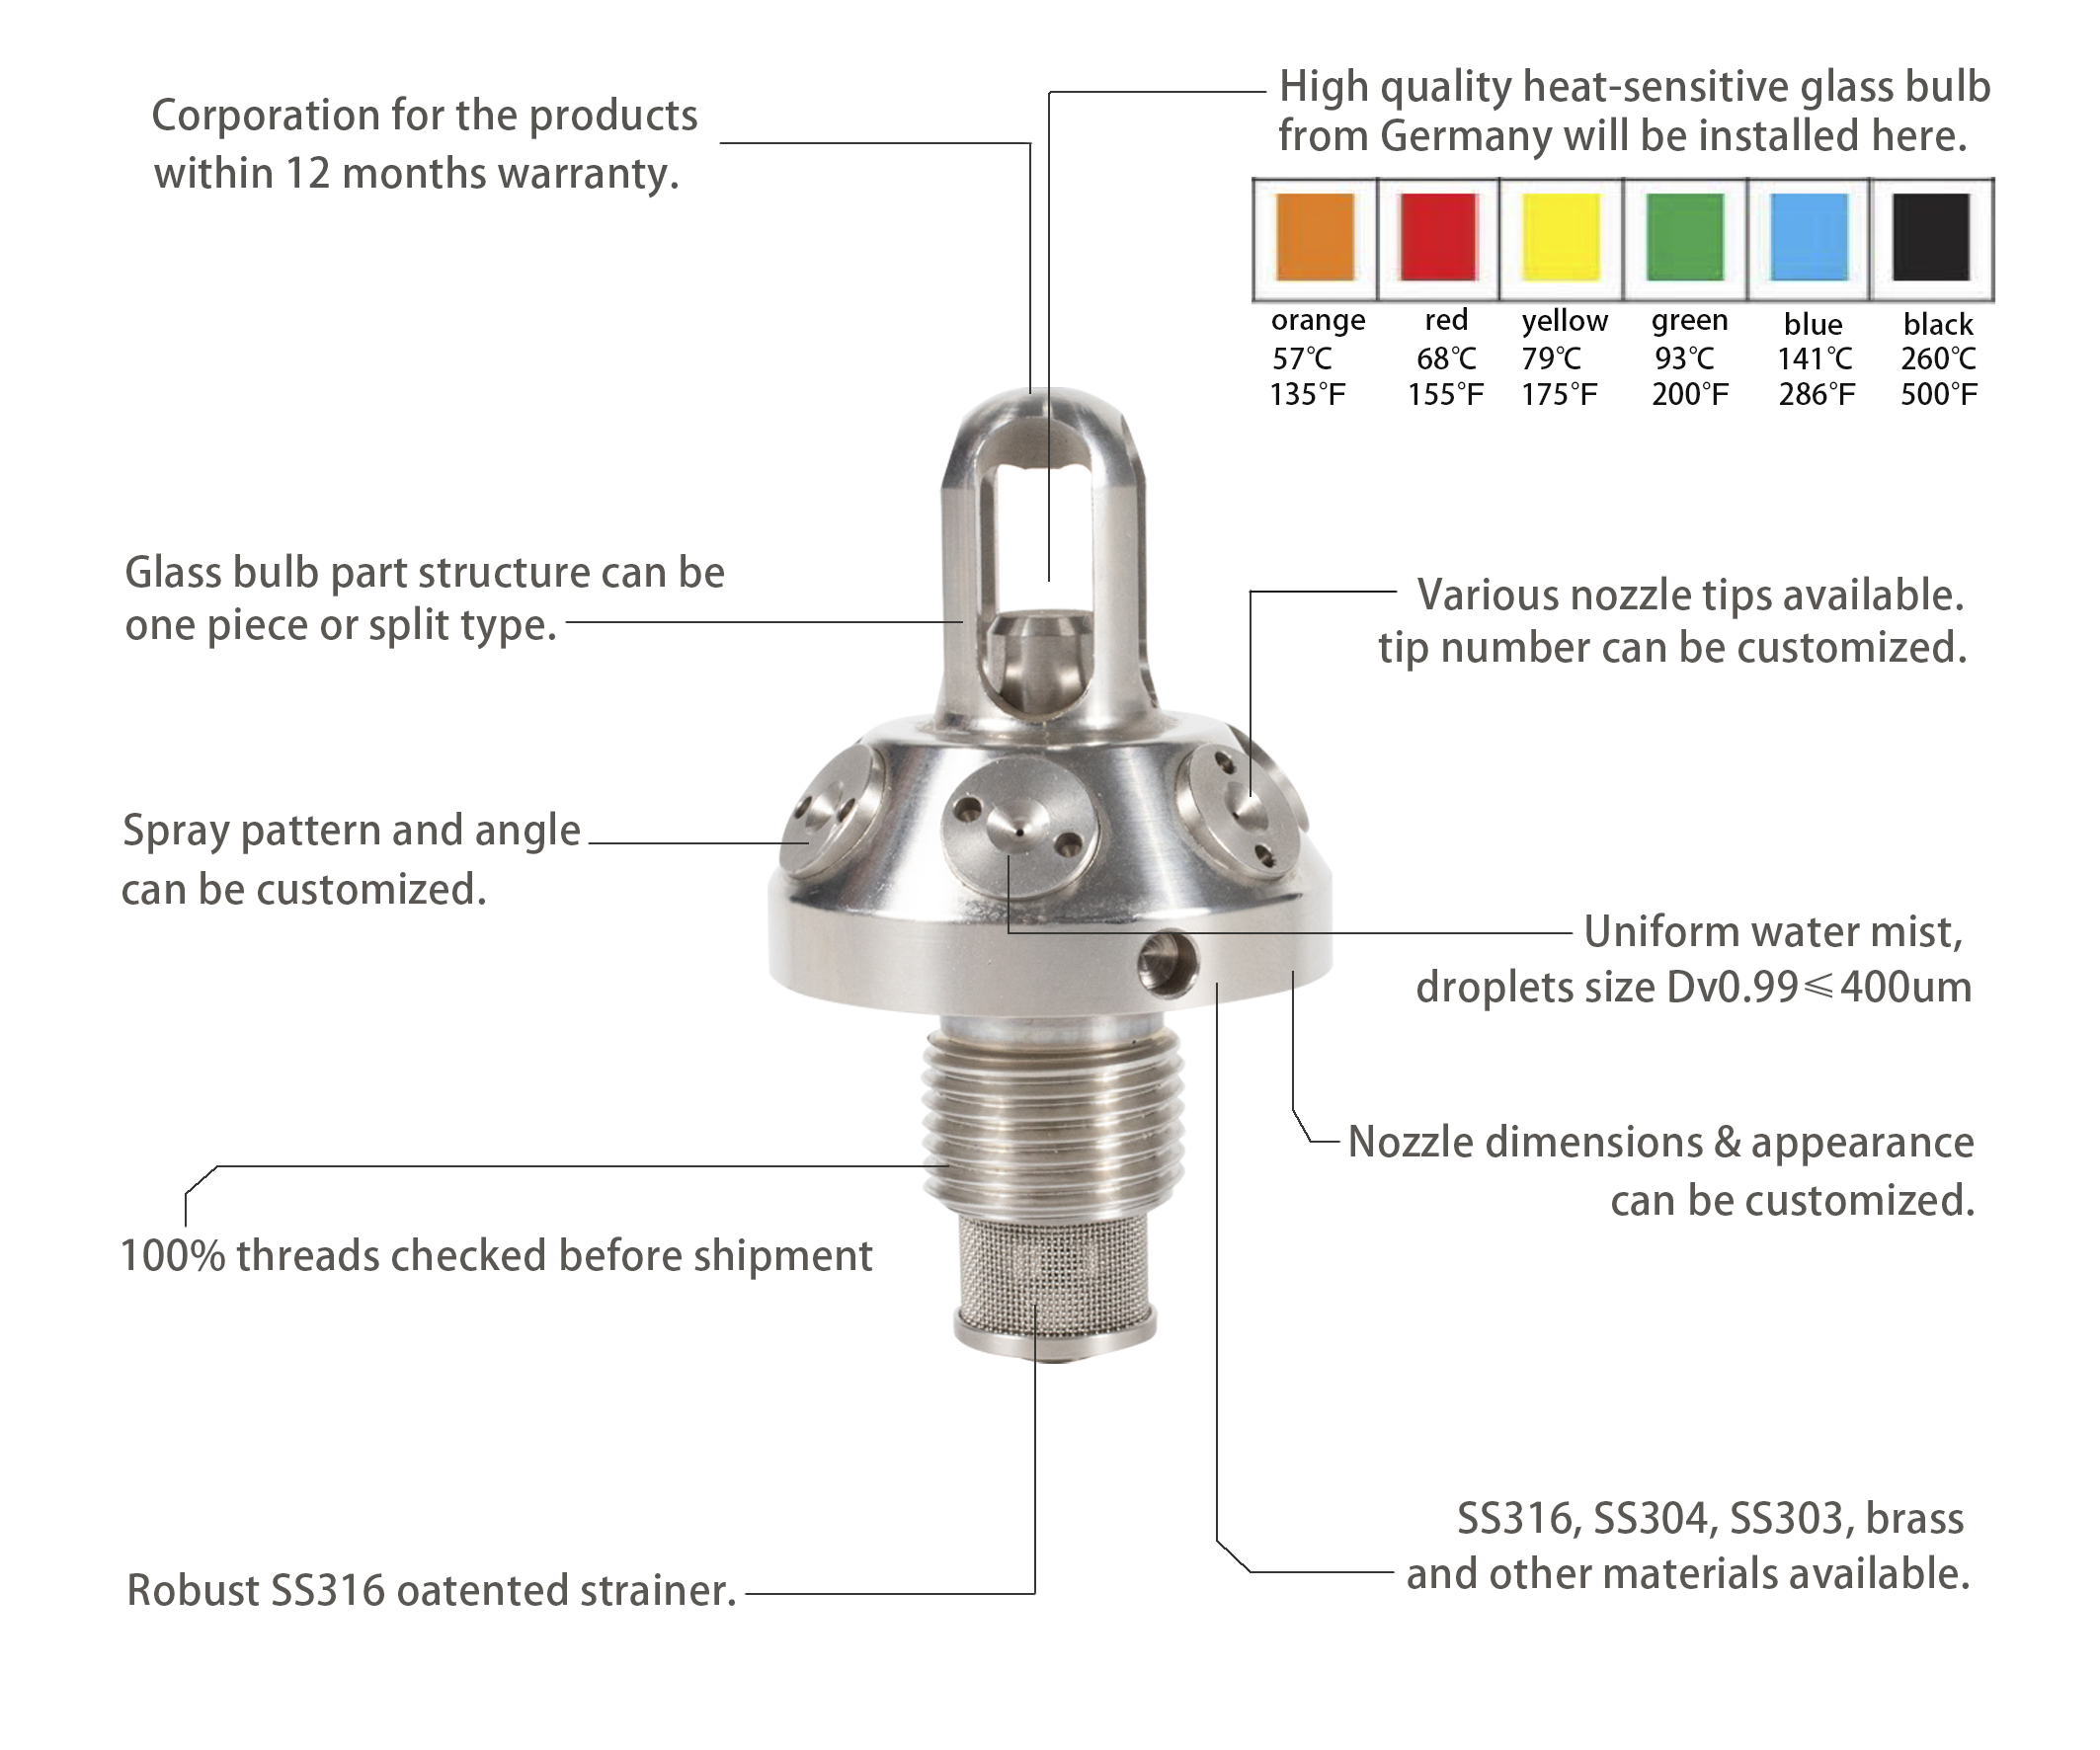 High-pressure Water Mist System All The Benefits of Different Fire-extinguishing Methods Packed into One